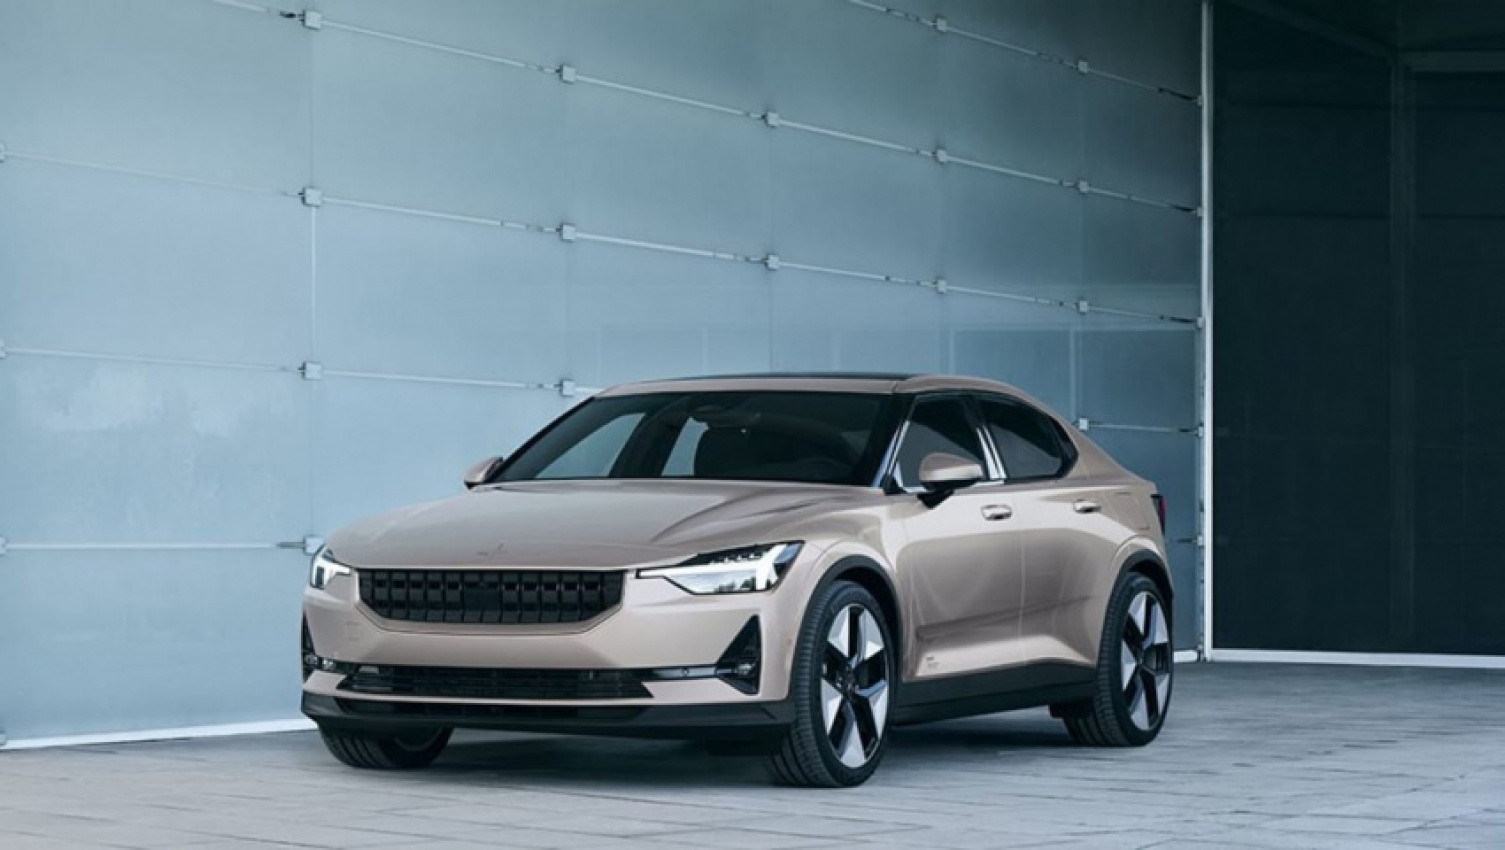 autos, cars, polestar, tesla, electric, electric cars, green cars, industry news, polestar 2, polestar 2 2022, polestar news, prestige & luxury cars, showroom news, tesla model 3, did you miss an electric car bargain? polestar 2 updated for 2022 with tweaked features but higher pricing that's in line with tesla model 3 rival